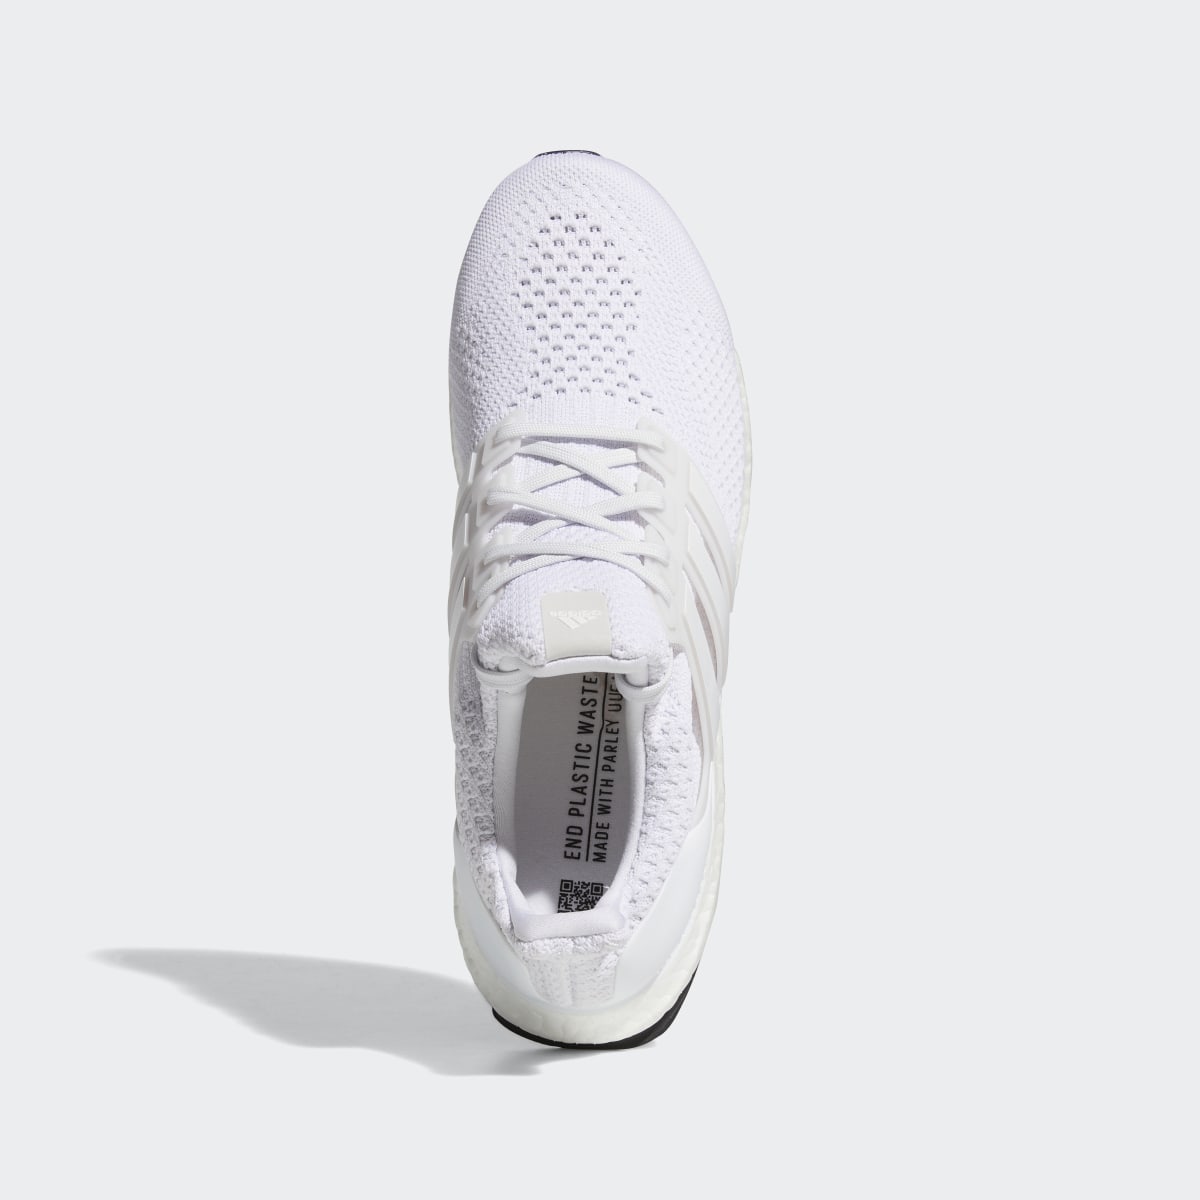 Adidas Ultraboost DNA 5.0 Shoes. 4